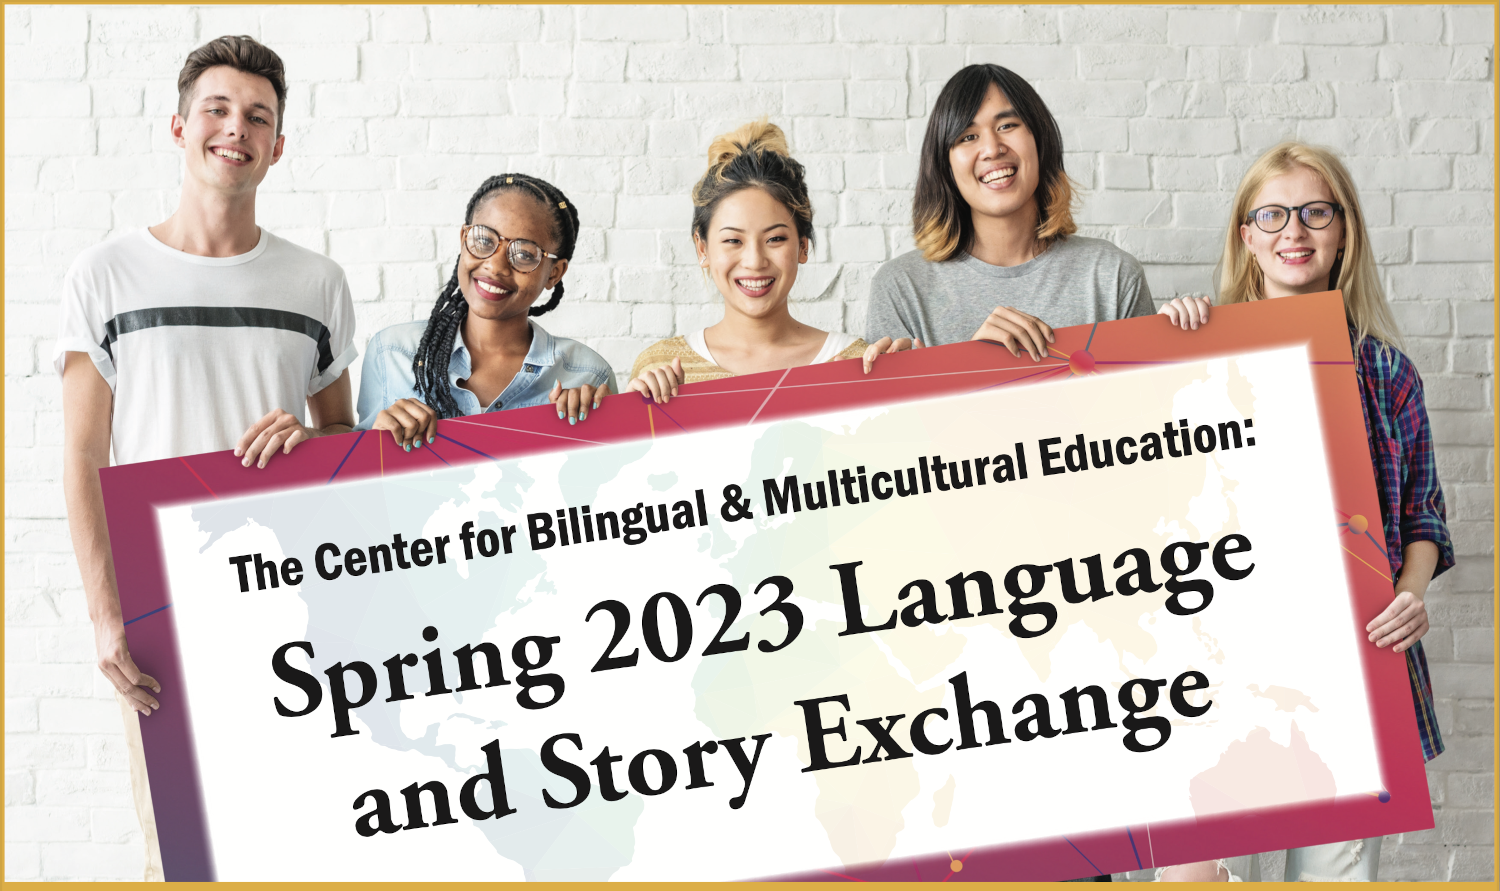 The Center for Bilingual and Multicultural Education: Spring 2023 Language and Story Exchange 